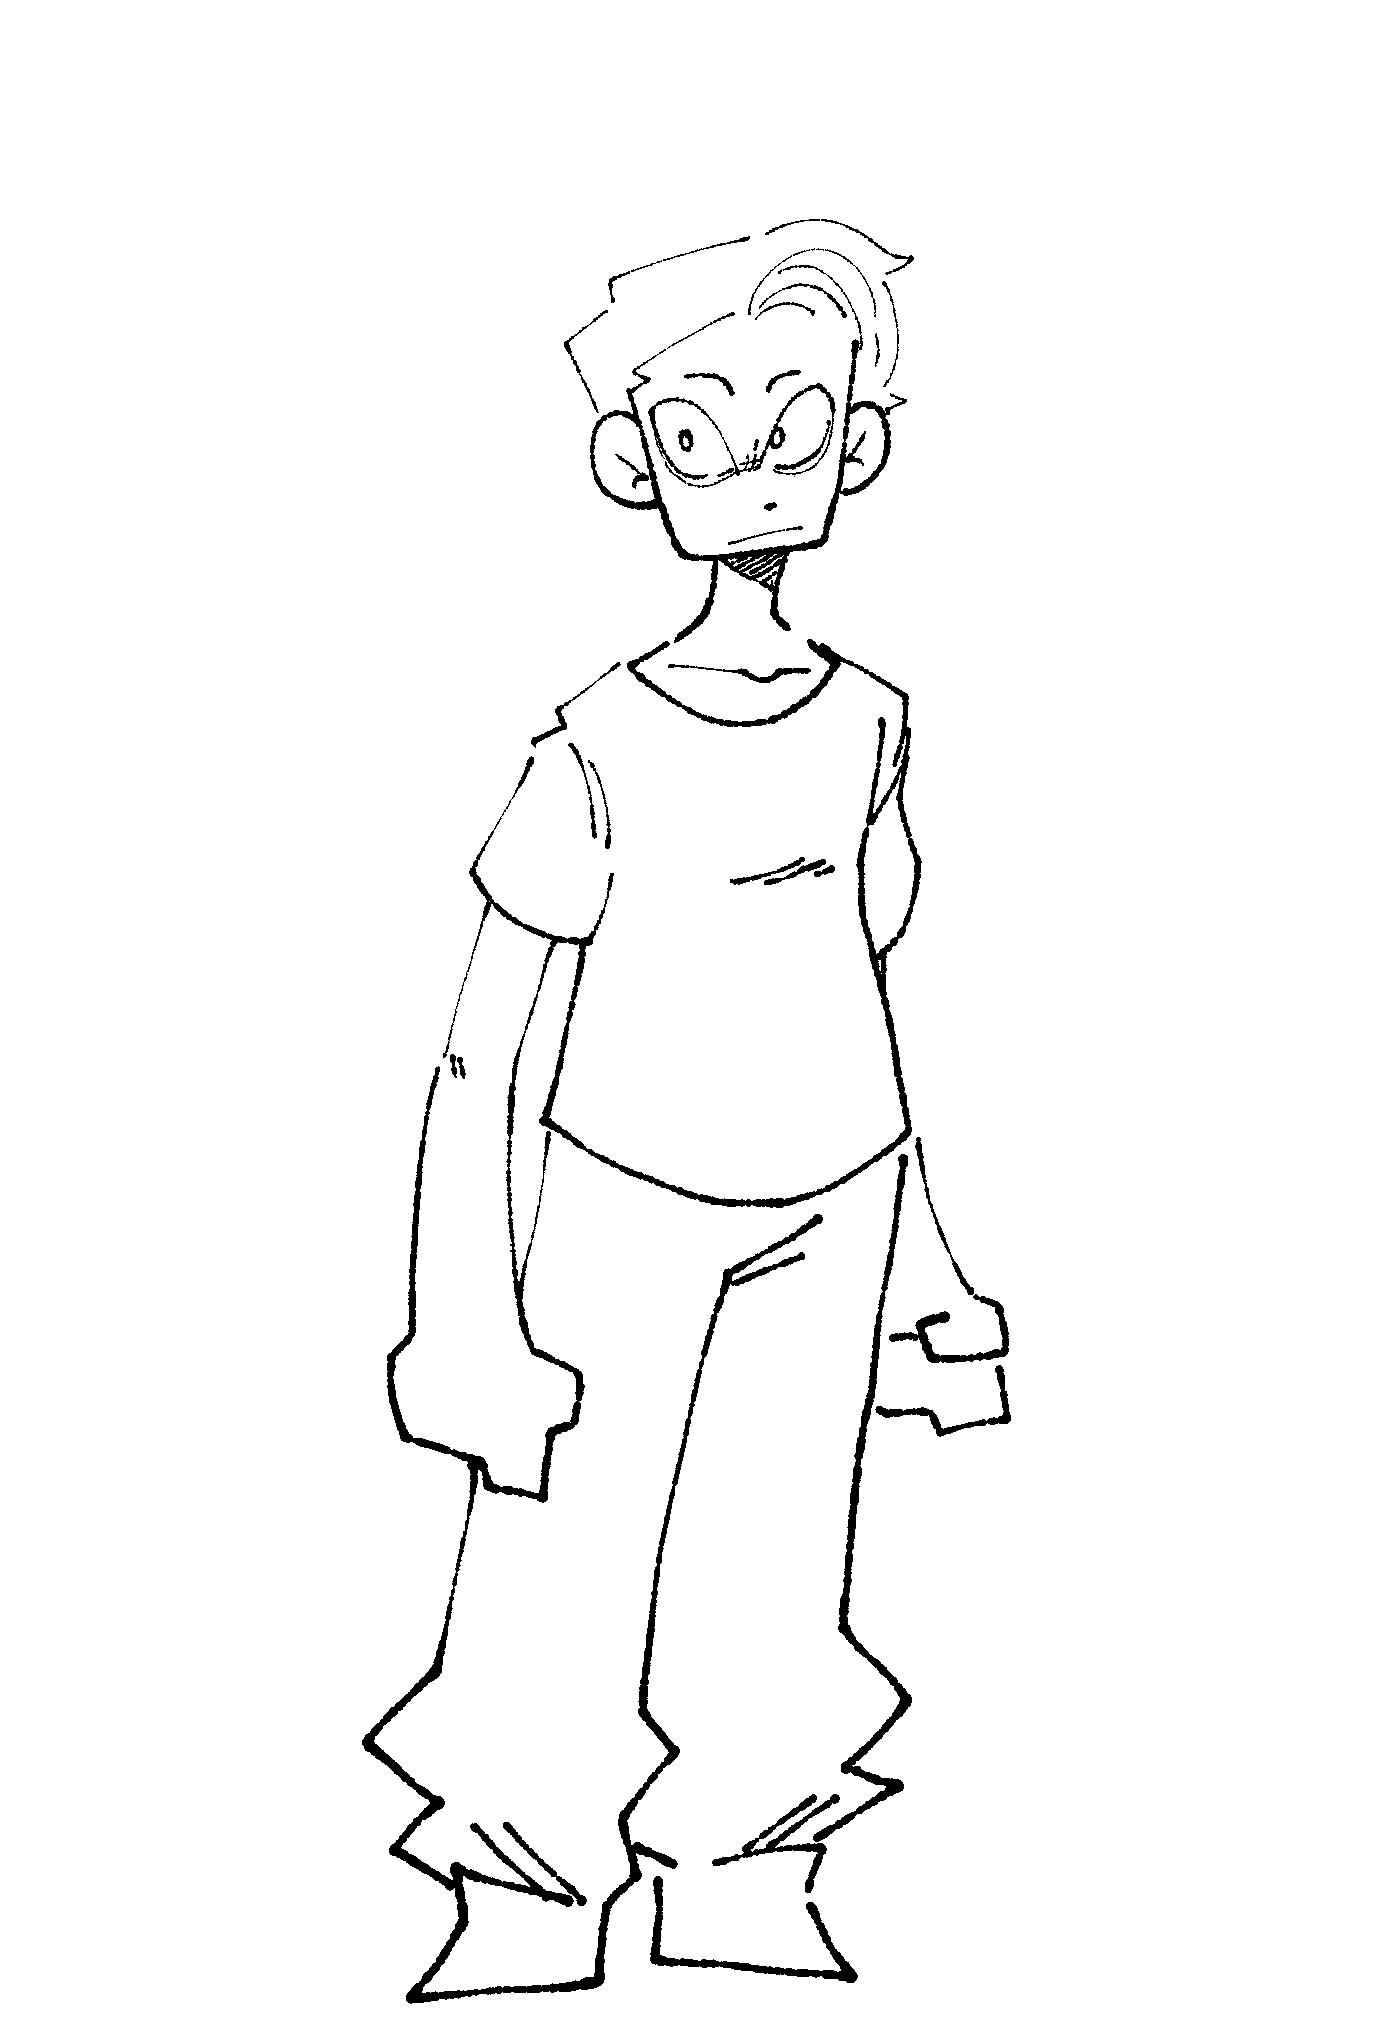 The initial design sketch of Sam from Commonplace. They are wearing a simple shirt and pants, and their hair is disheveled.